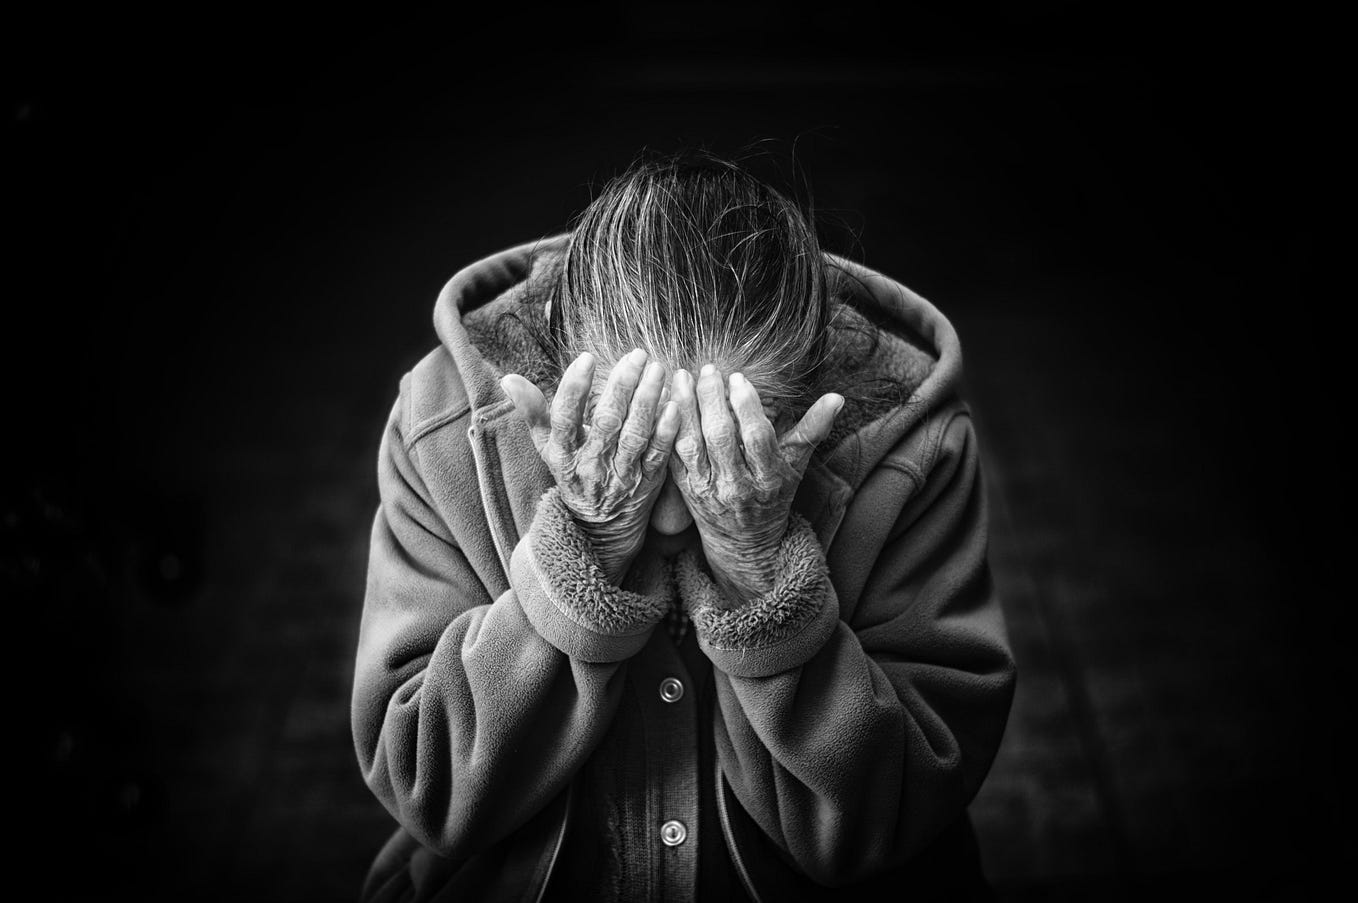 Black and white image of person wearing a sweatshirt holding their head in their hands. Their hair is long and tied back.